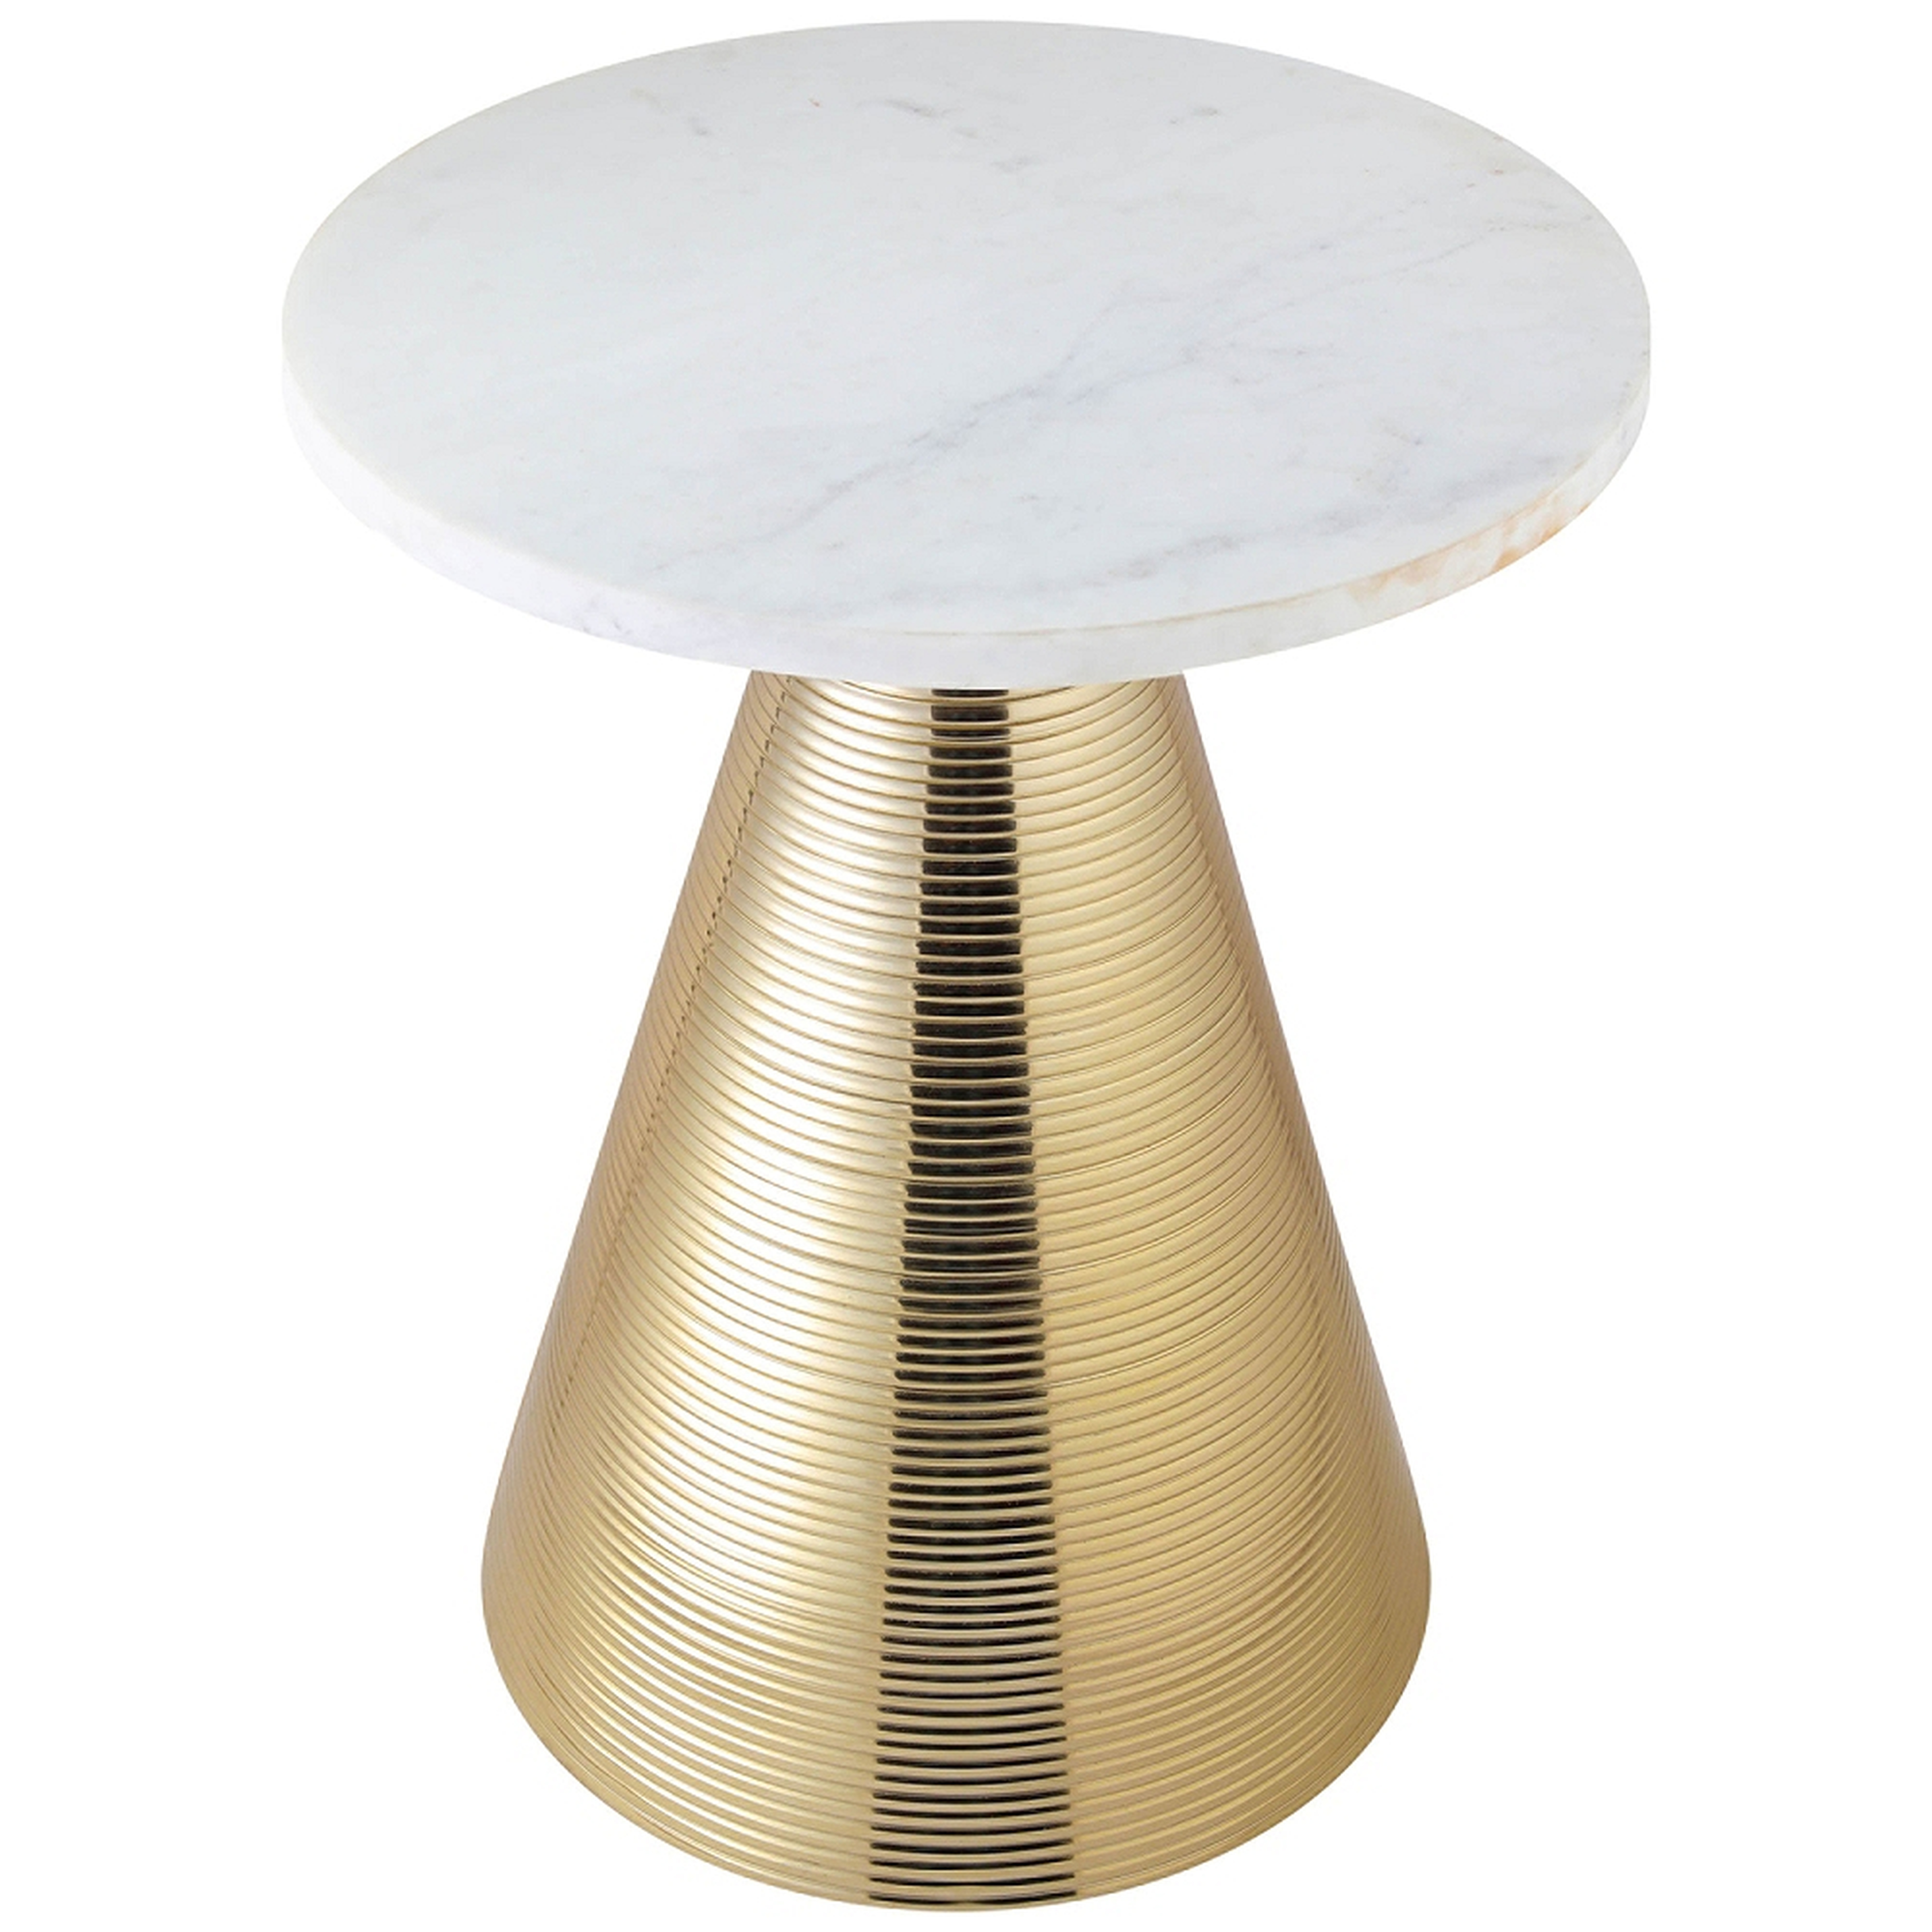 Tempo White Marble Top and Gold Conical Base Side Table - Style # 64N25 - Lamps Plus